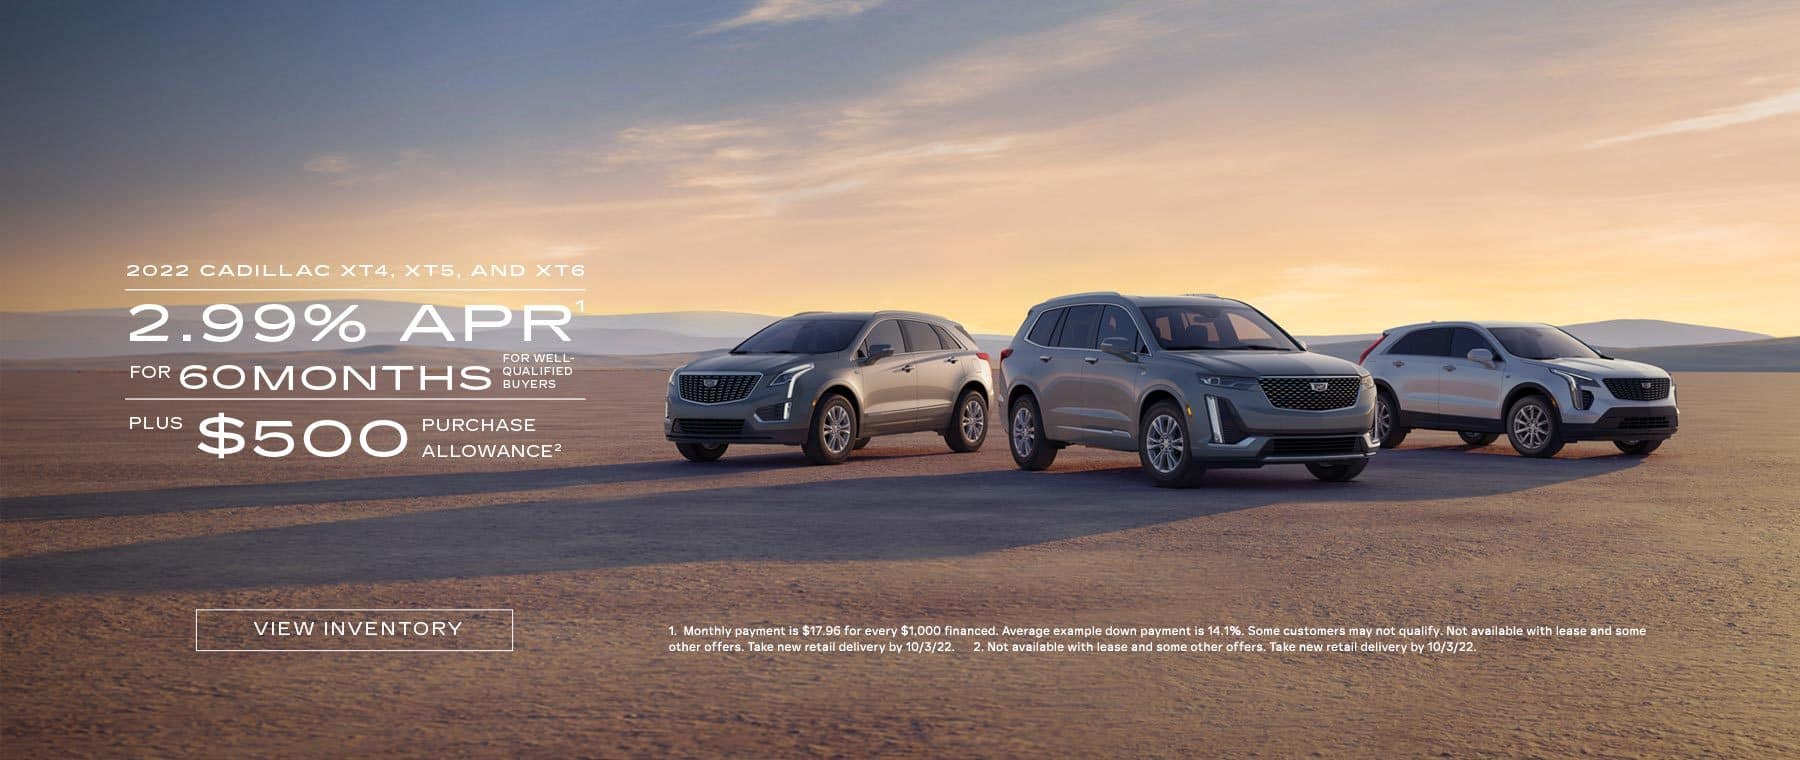 2022 Cadillac XT4, XT5, and XT6. 2.99% APR for 60 months for well-qualified buyers plus $500 purchase allowance.